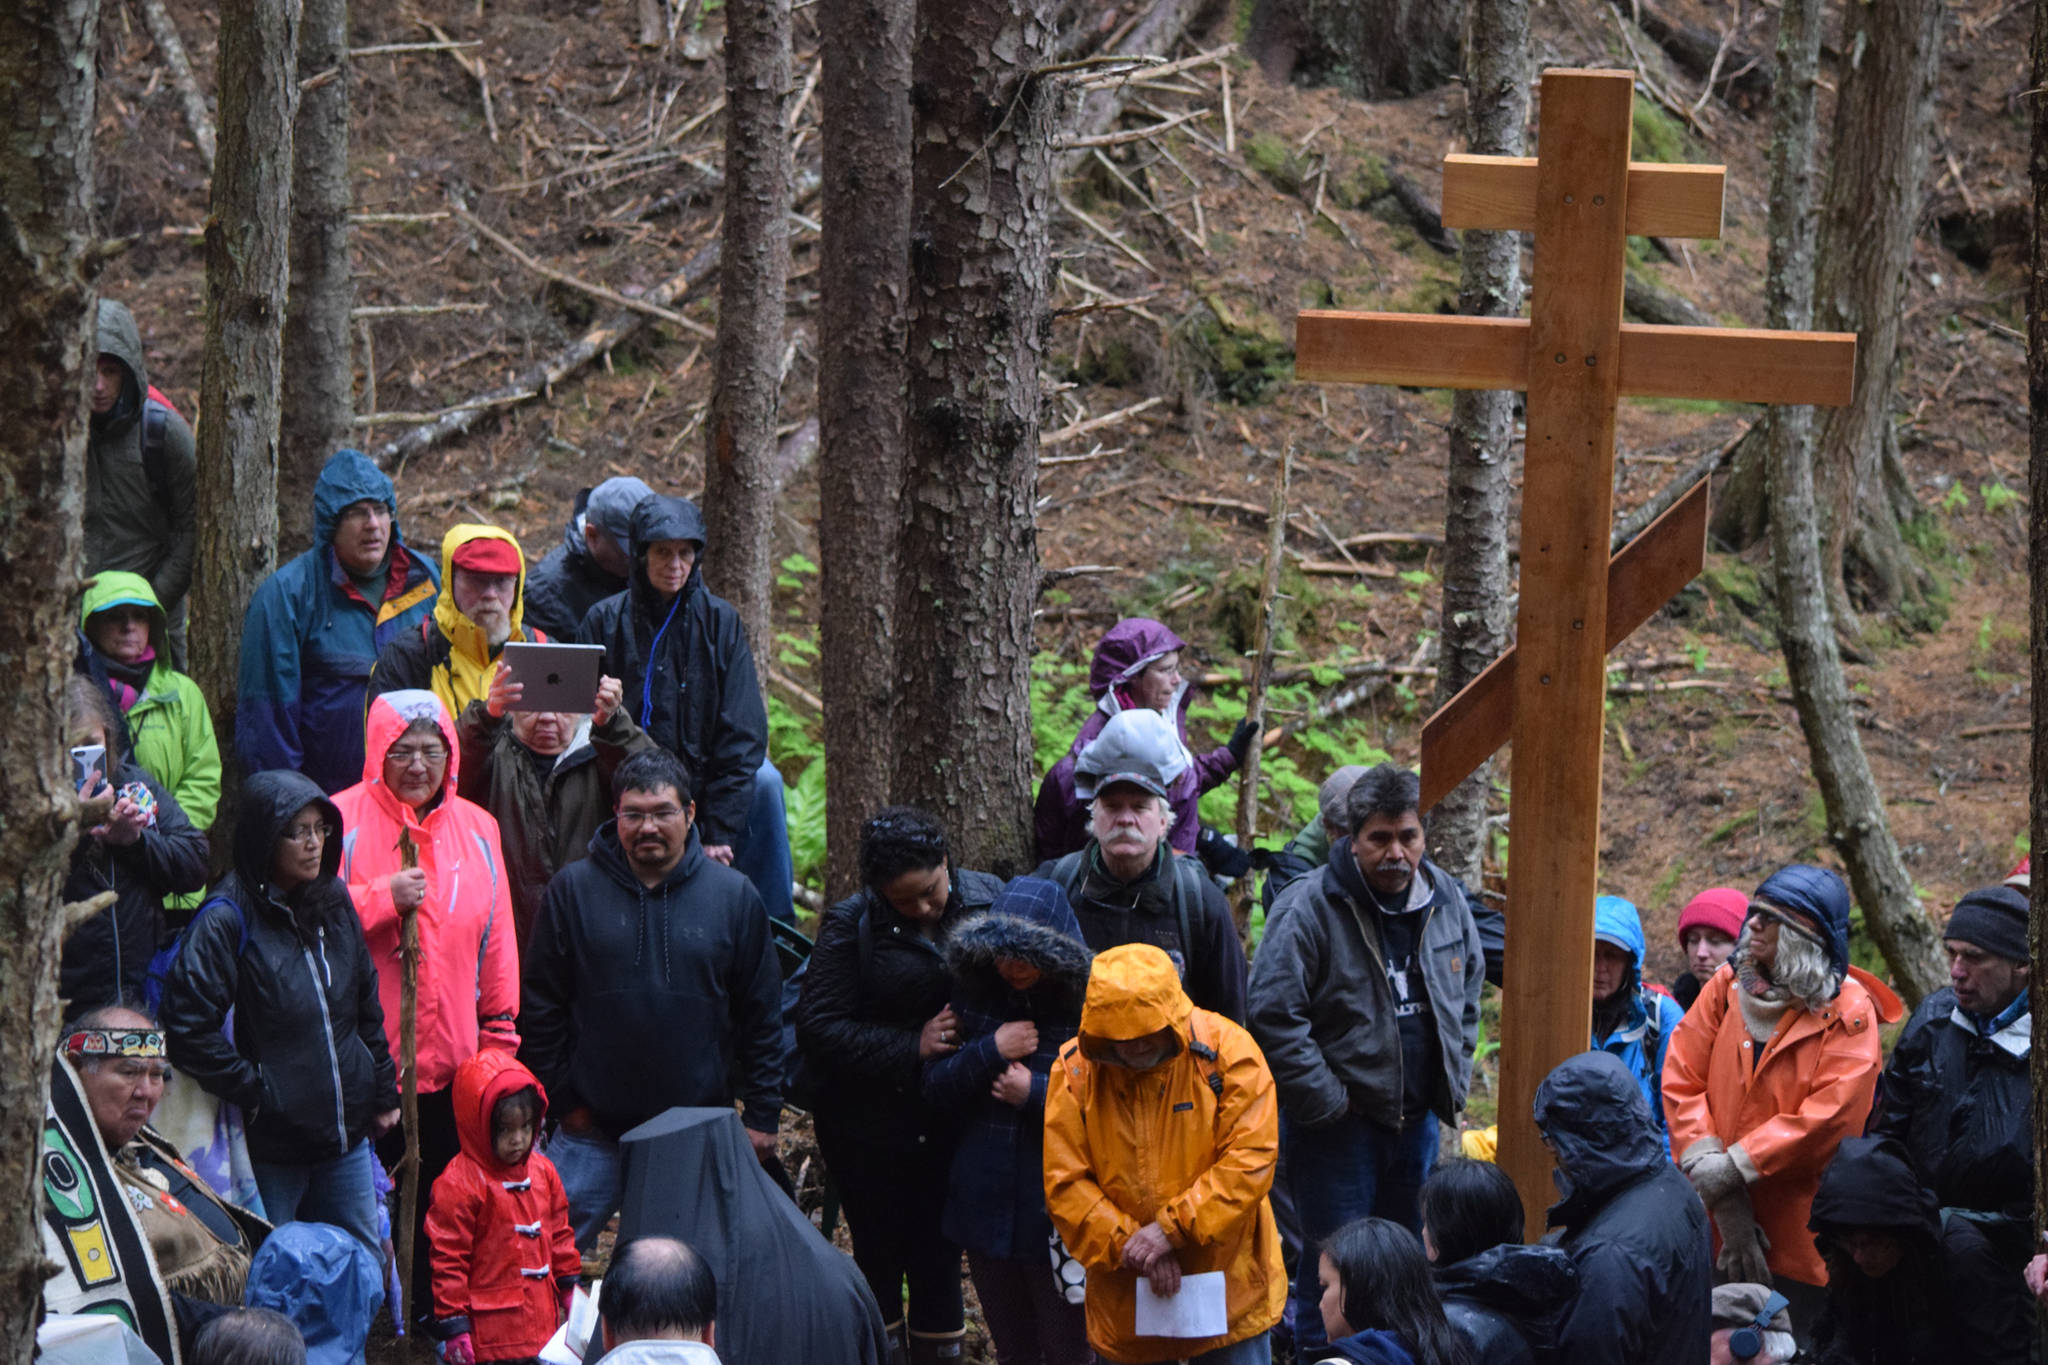 Survivors, friends and family visit the Funter Bay internment camp where of hundreds of Aleutian and Pribiloff Island Alaska Natives were held during WWII. Commemorating the 75th anniversary of the internment, the group installed a “healing cross” at the grave site of those who perished during their years of internment. (Kevin Gullufsen | Juneau Empire)